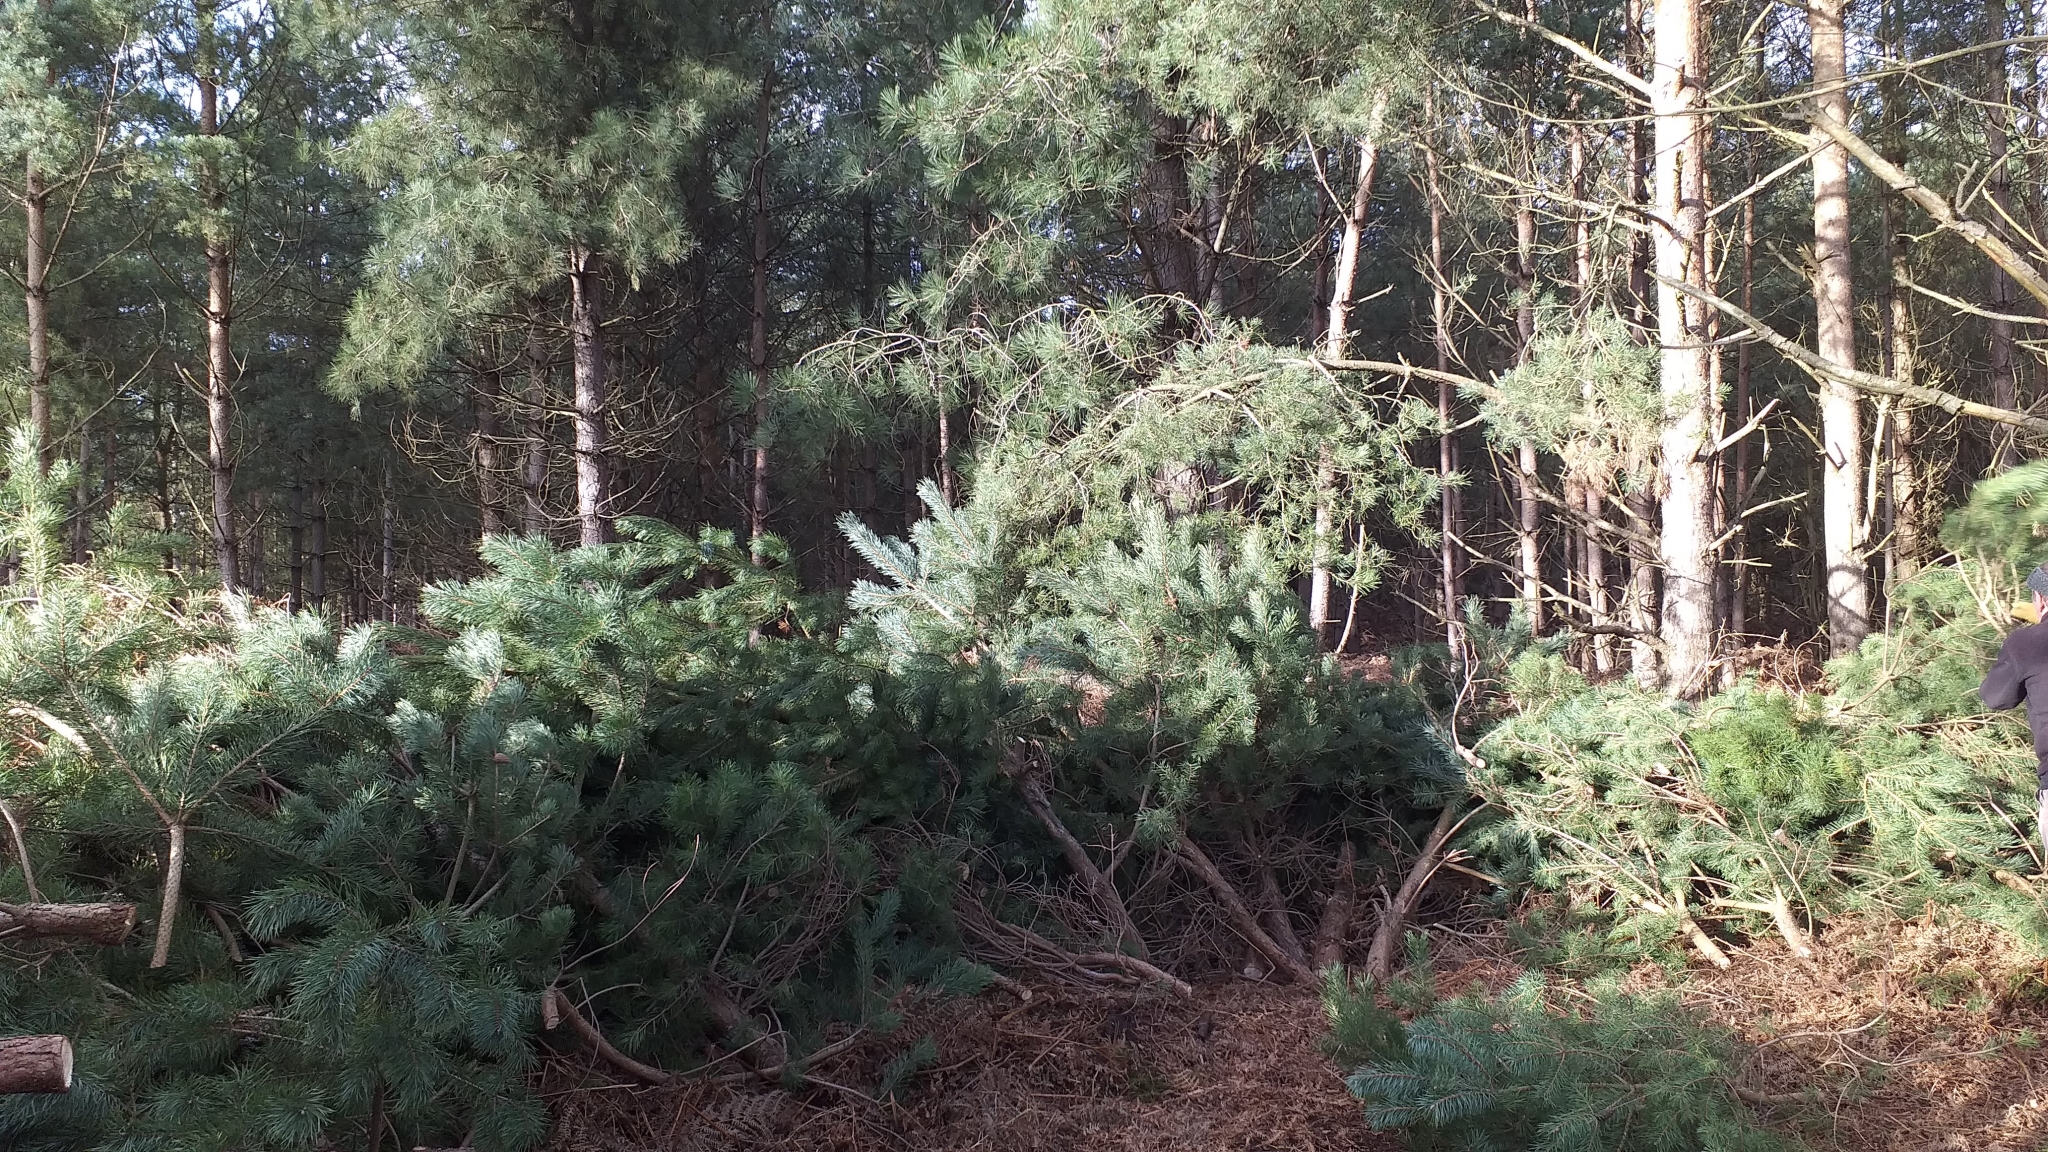 A photo from the FoTF Conservation Event - December 2019 - Self Seeded Pine Tree Removal on the Goshawk Trail : A large pile of removed pine trees